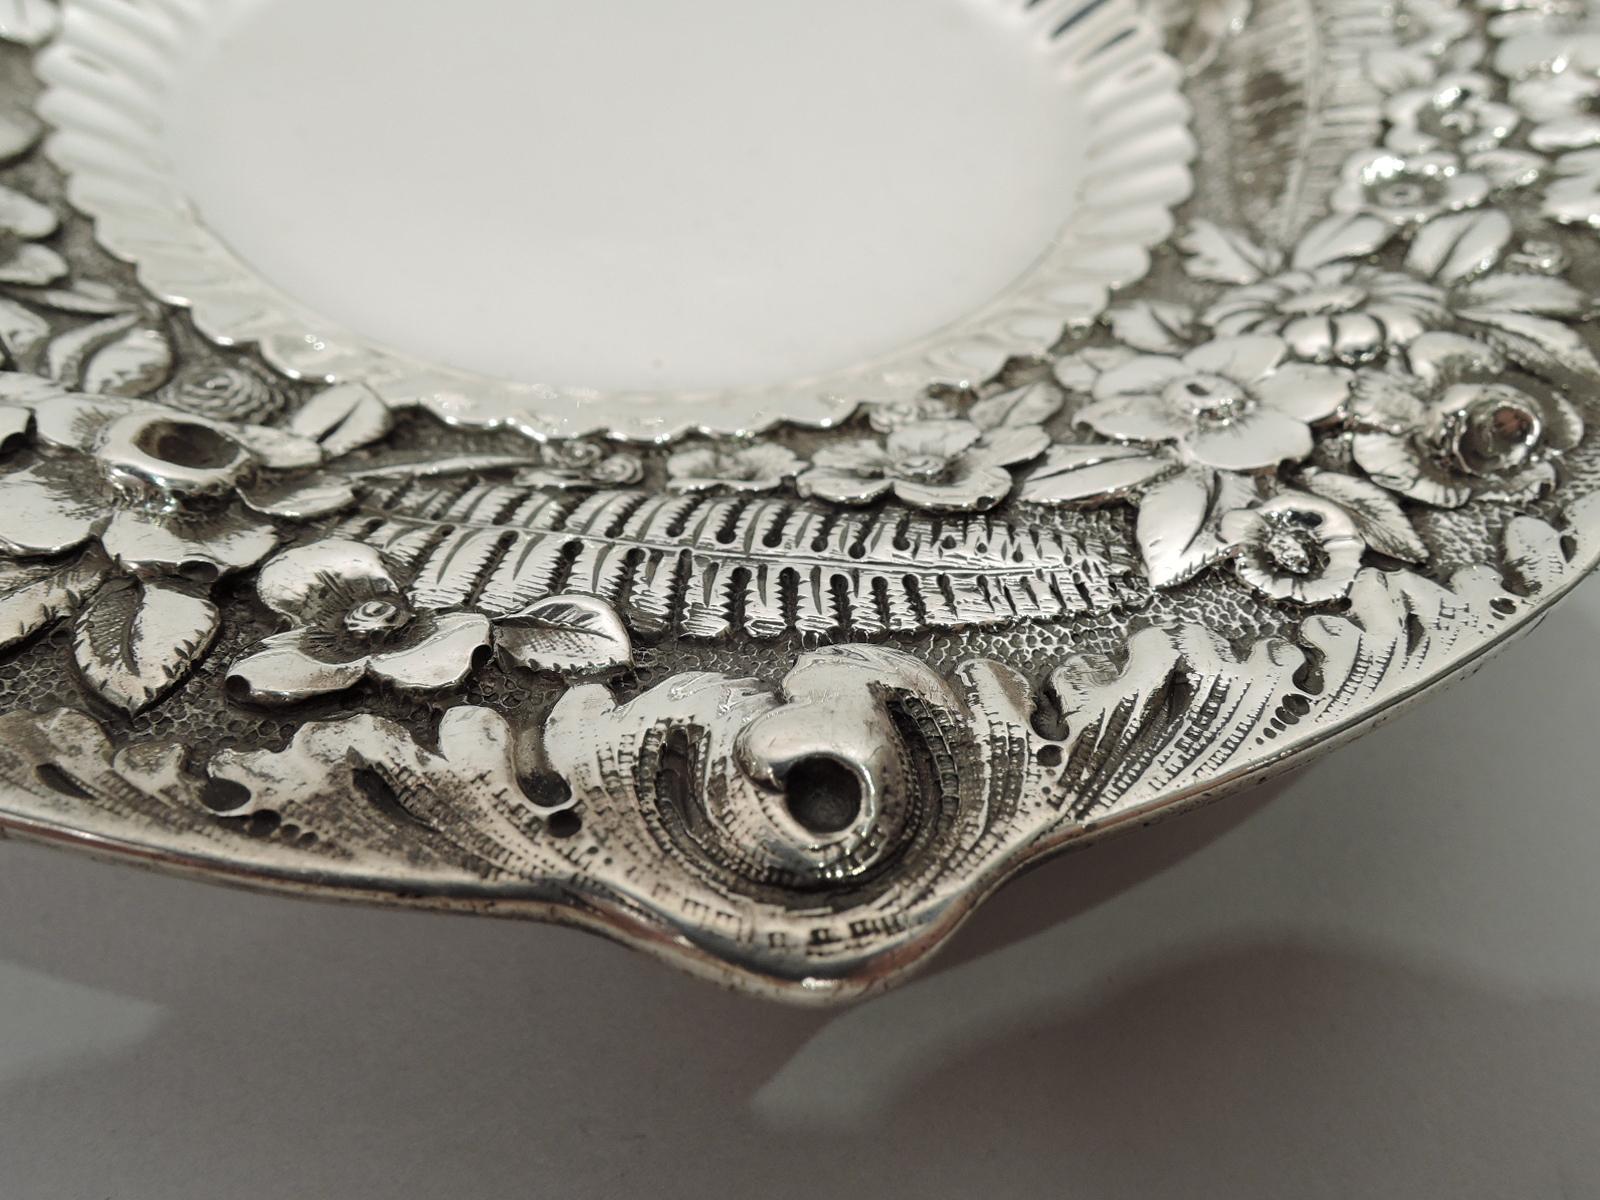 Pretty Victorian sterling silver dish. Made by Tiffany & Co. in New York. Round and plain well with fluted border. Shoulder wide and tapering with allover floral and fern repousse. Irregular leaf rim. Fully marked including maker’s stamp, pattern